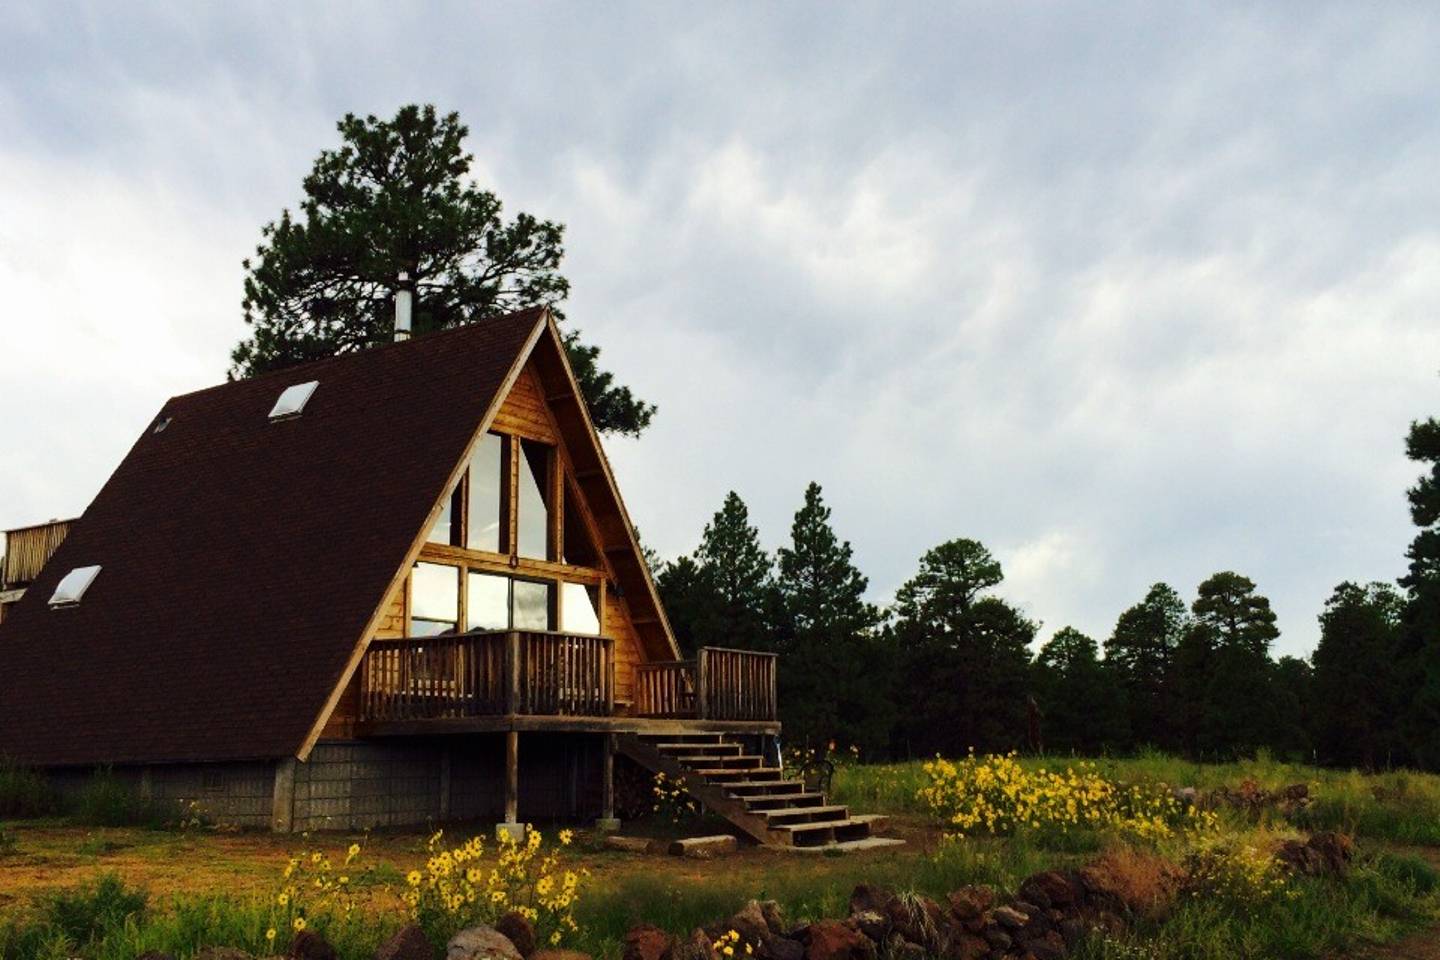 A-frame cabin in the Coconino National Forest in Arizona